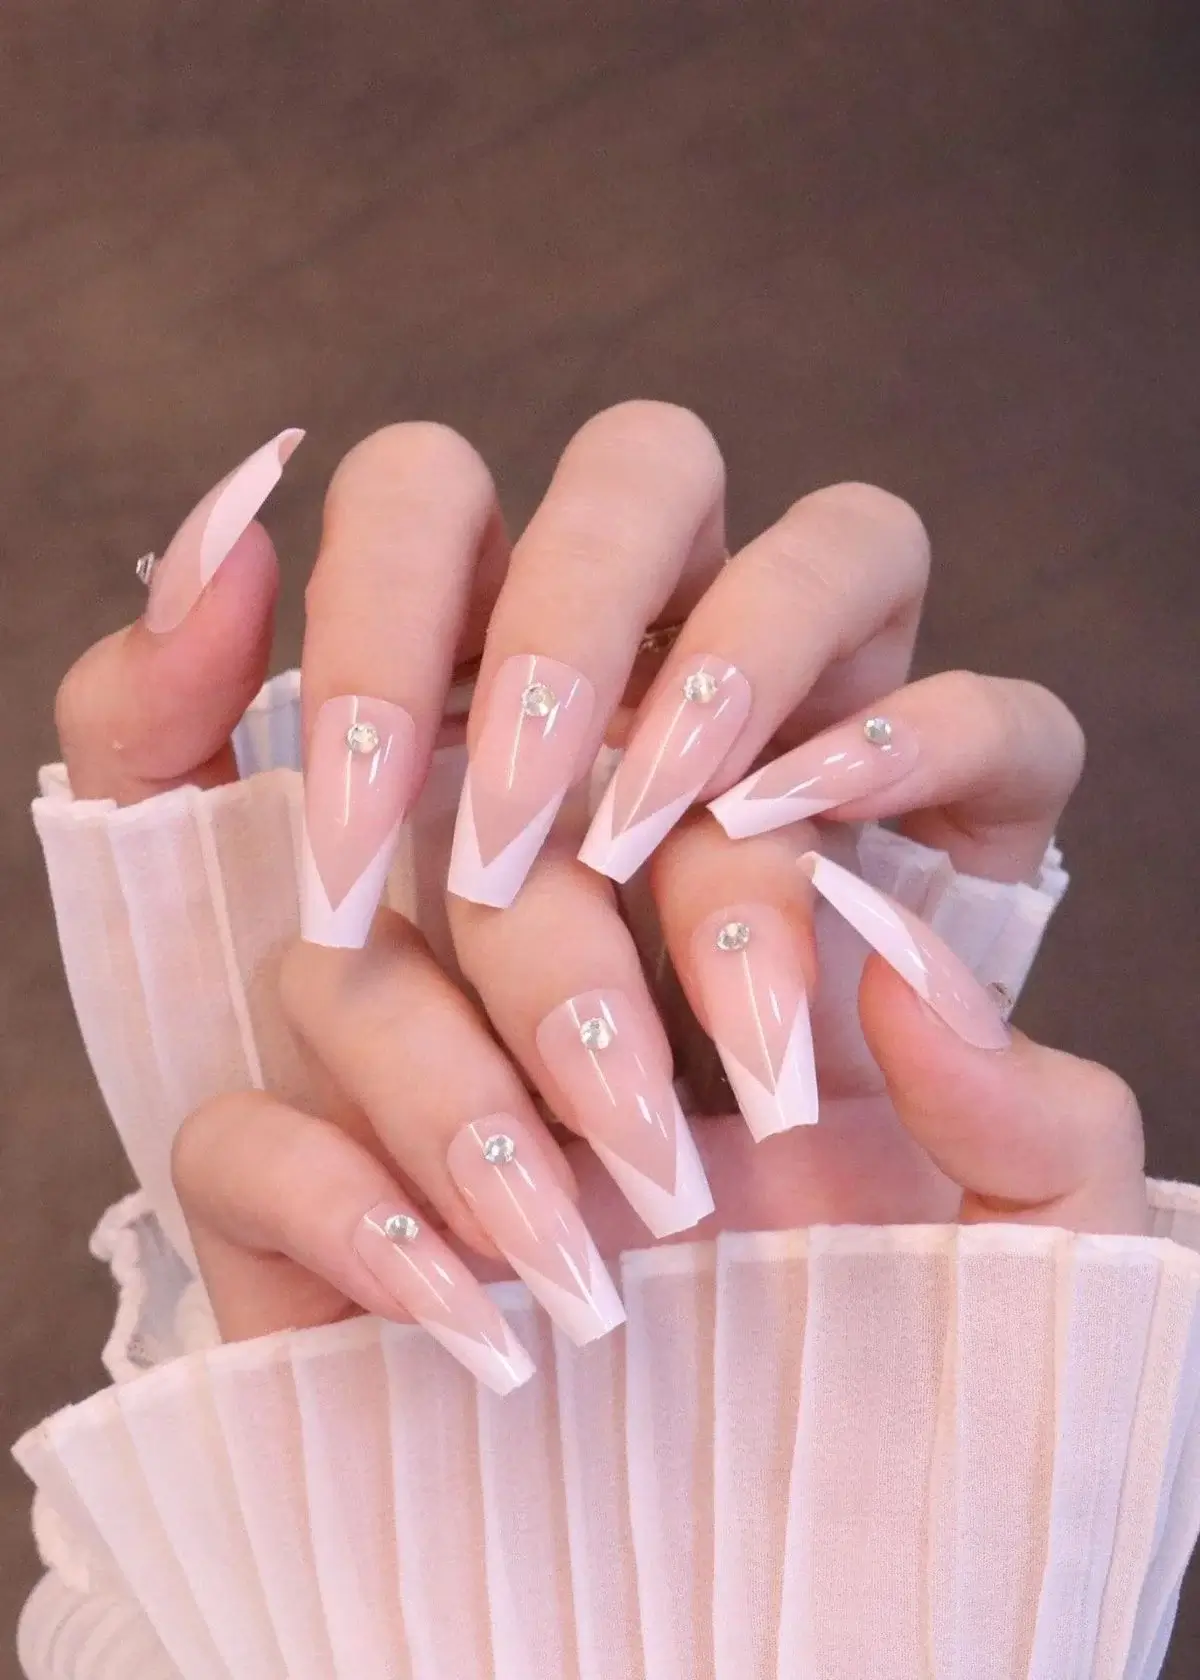 What are the benefits of french manicure kit?